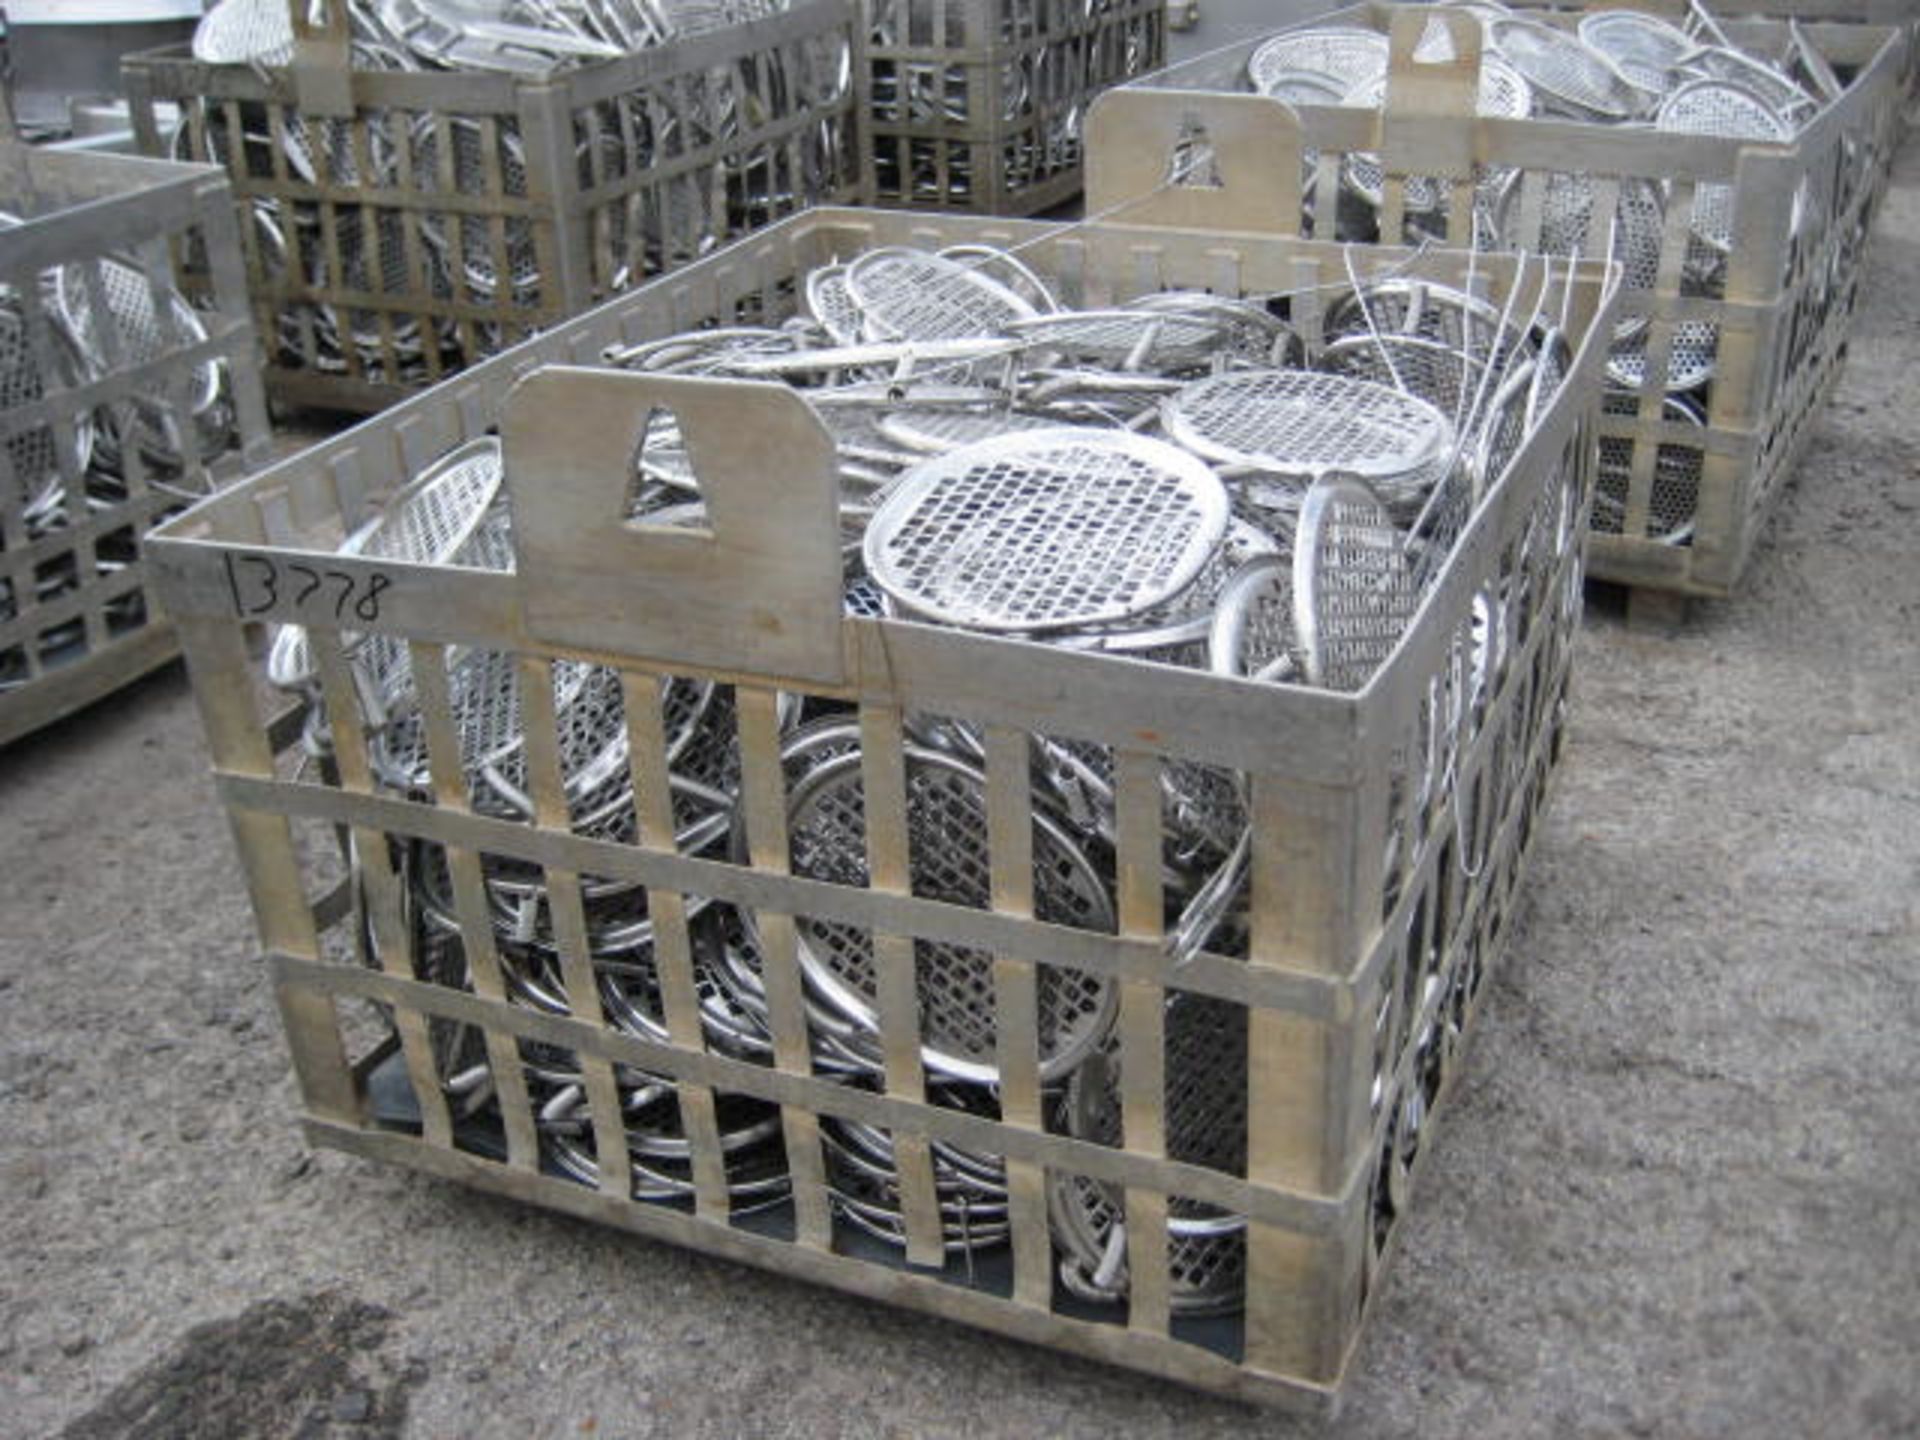 S/S slat basket of oval ham screens, 250 sq screens are 11.5"W by 13.25"L, - Image 2 of 2